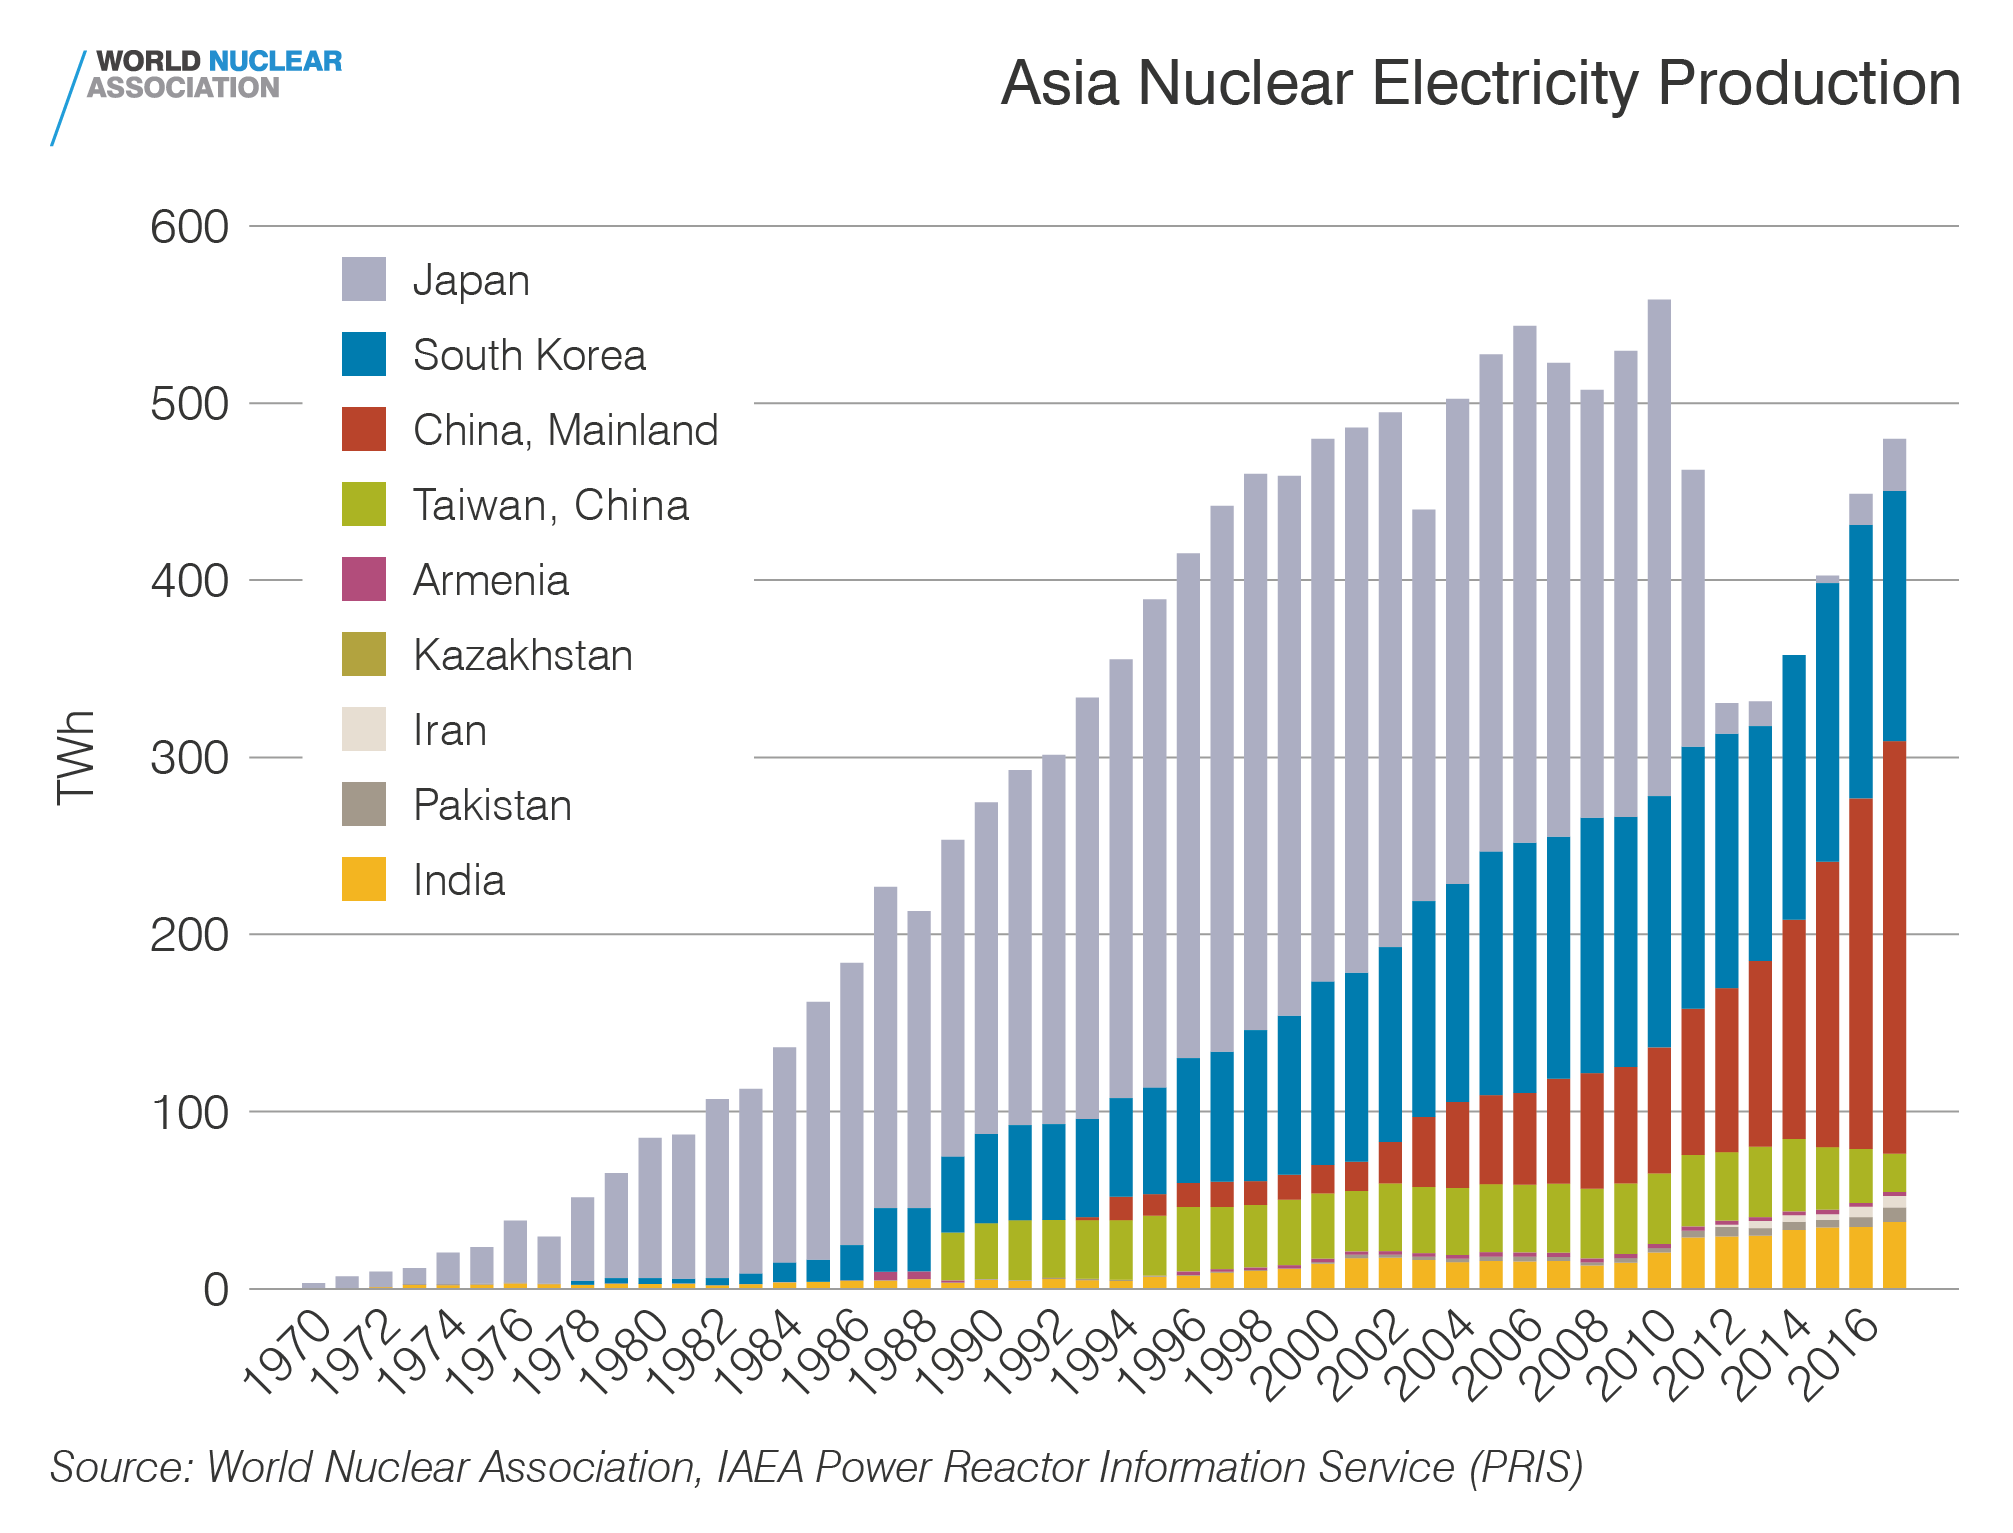 Asia nuclear electricity production